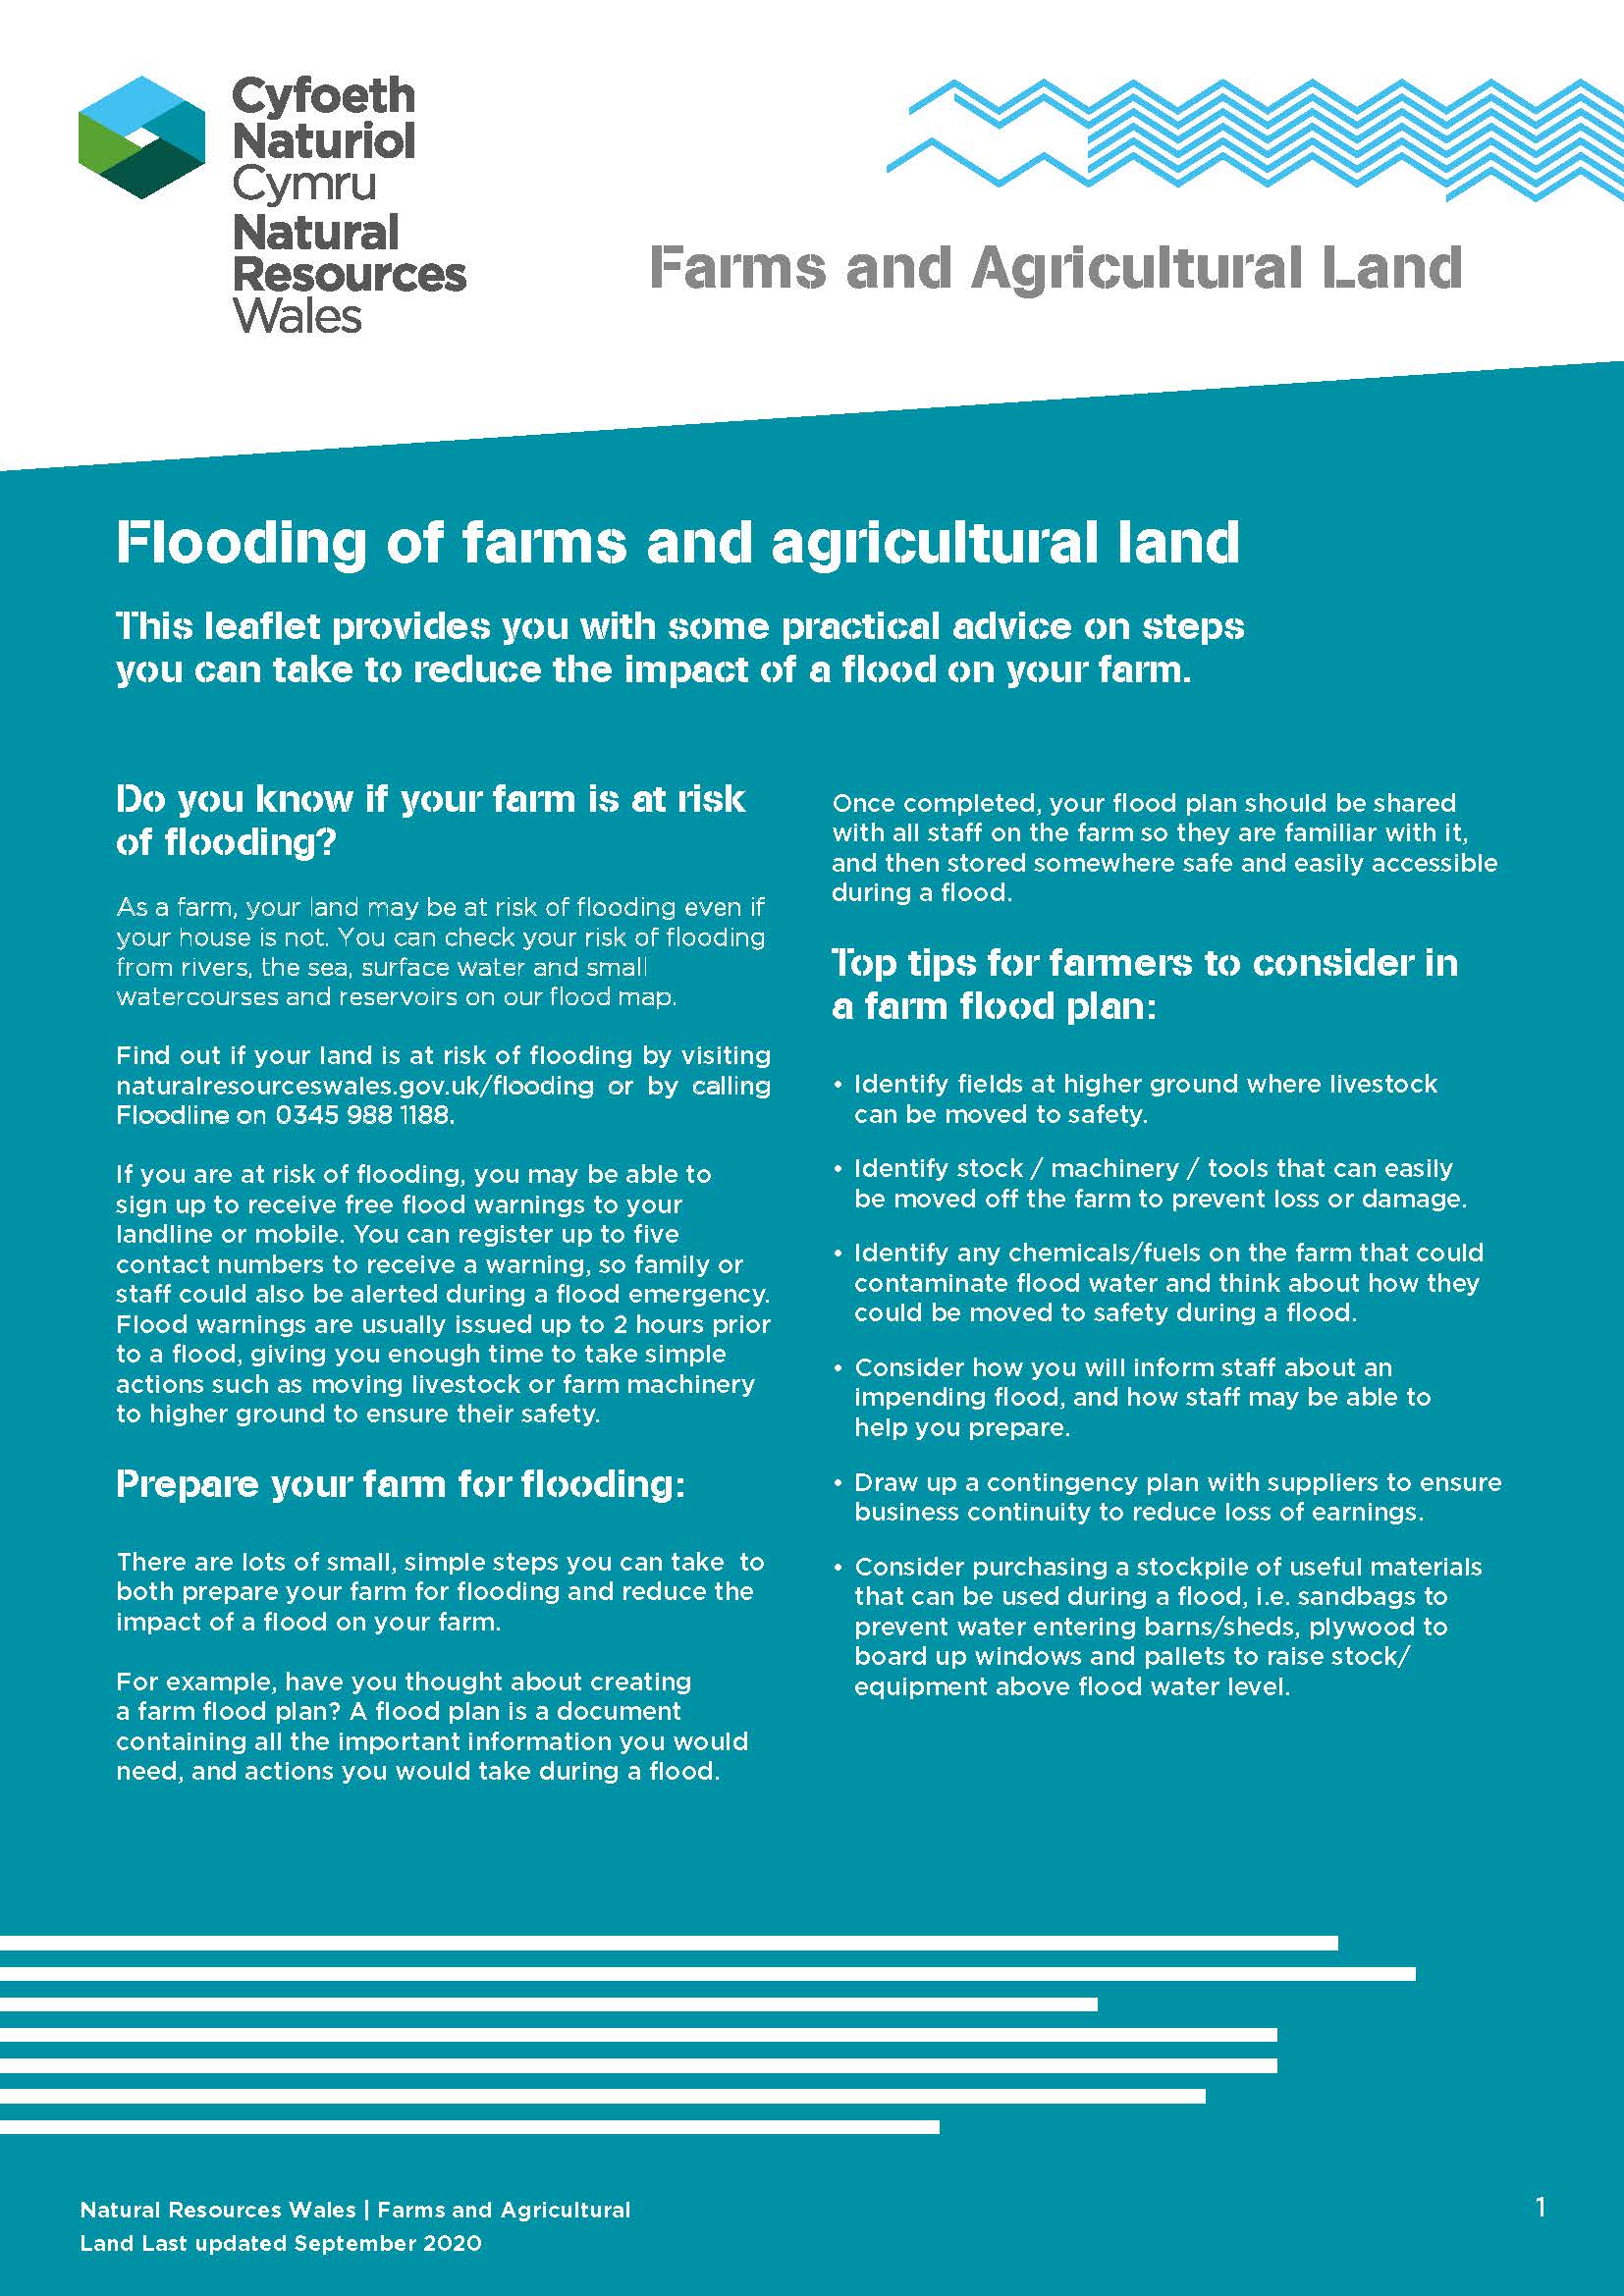 Image of 'Flooding of farms and agricultural land' leaflet